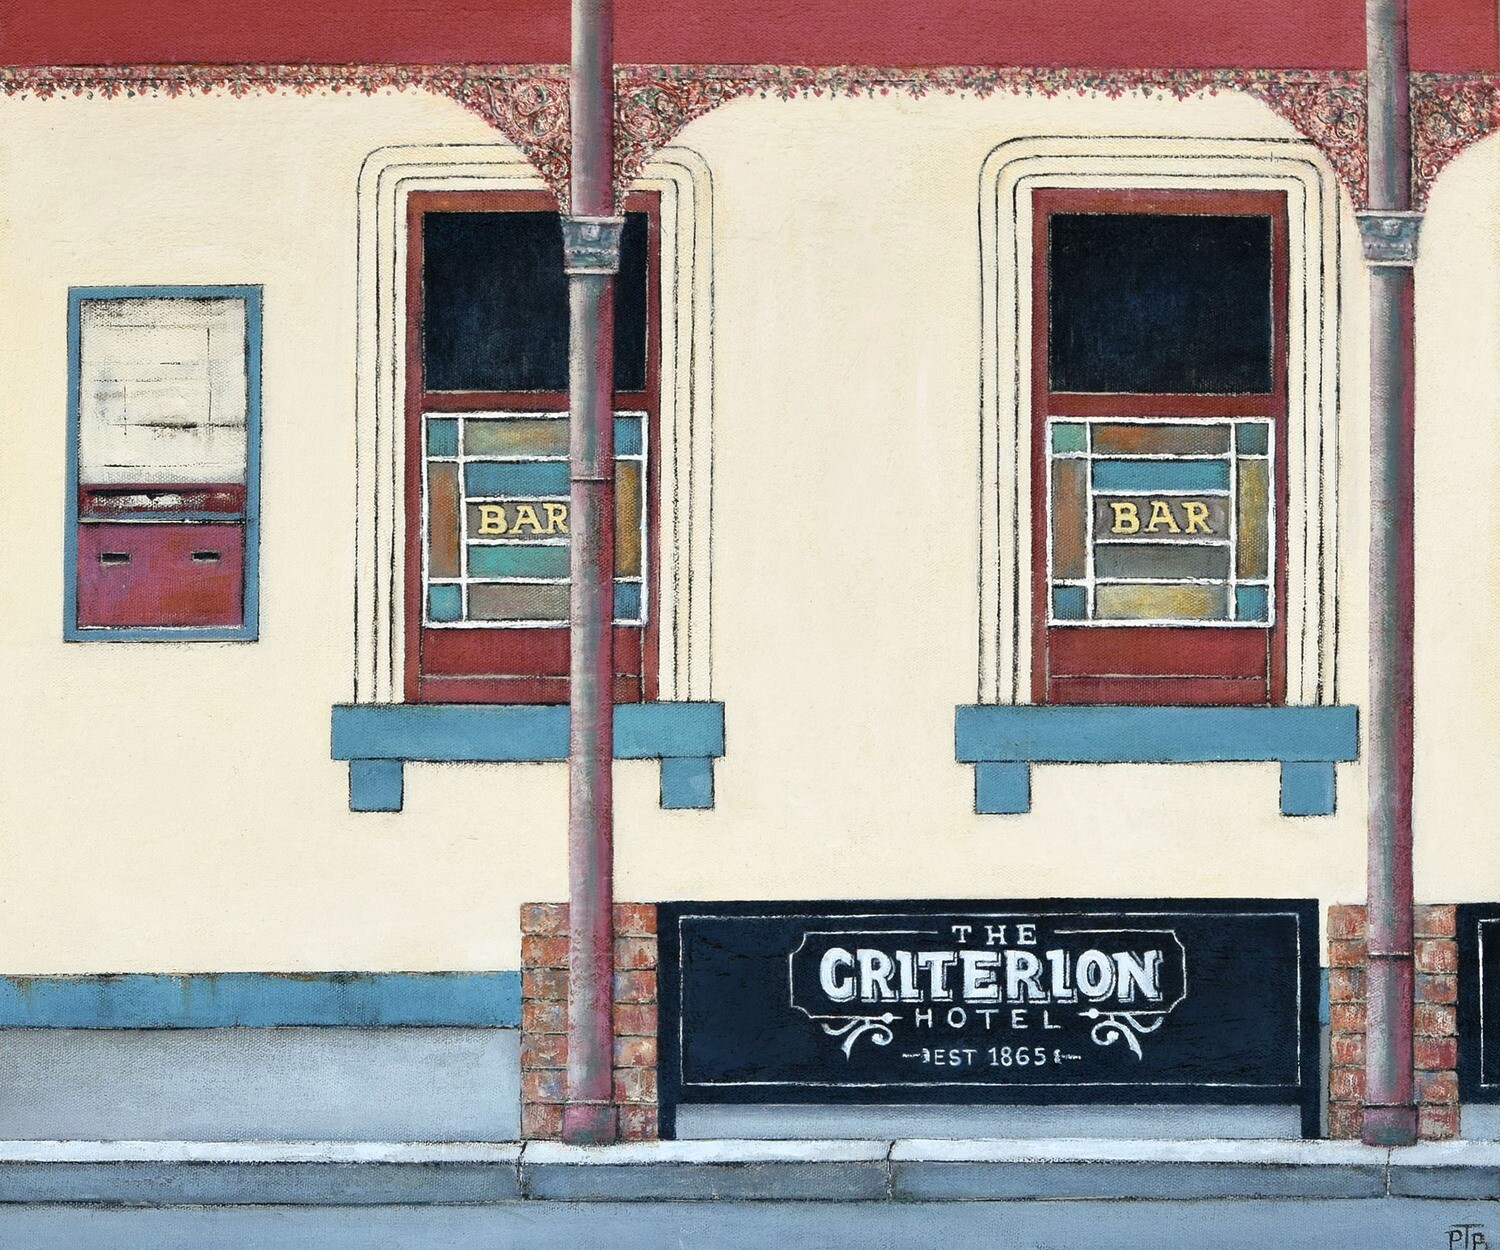 Original painting - Criterion Hotel.
*On display at the Criterion Hotel, Sale (payment and pickup options in description)